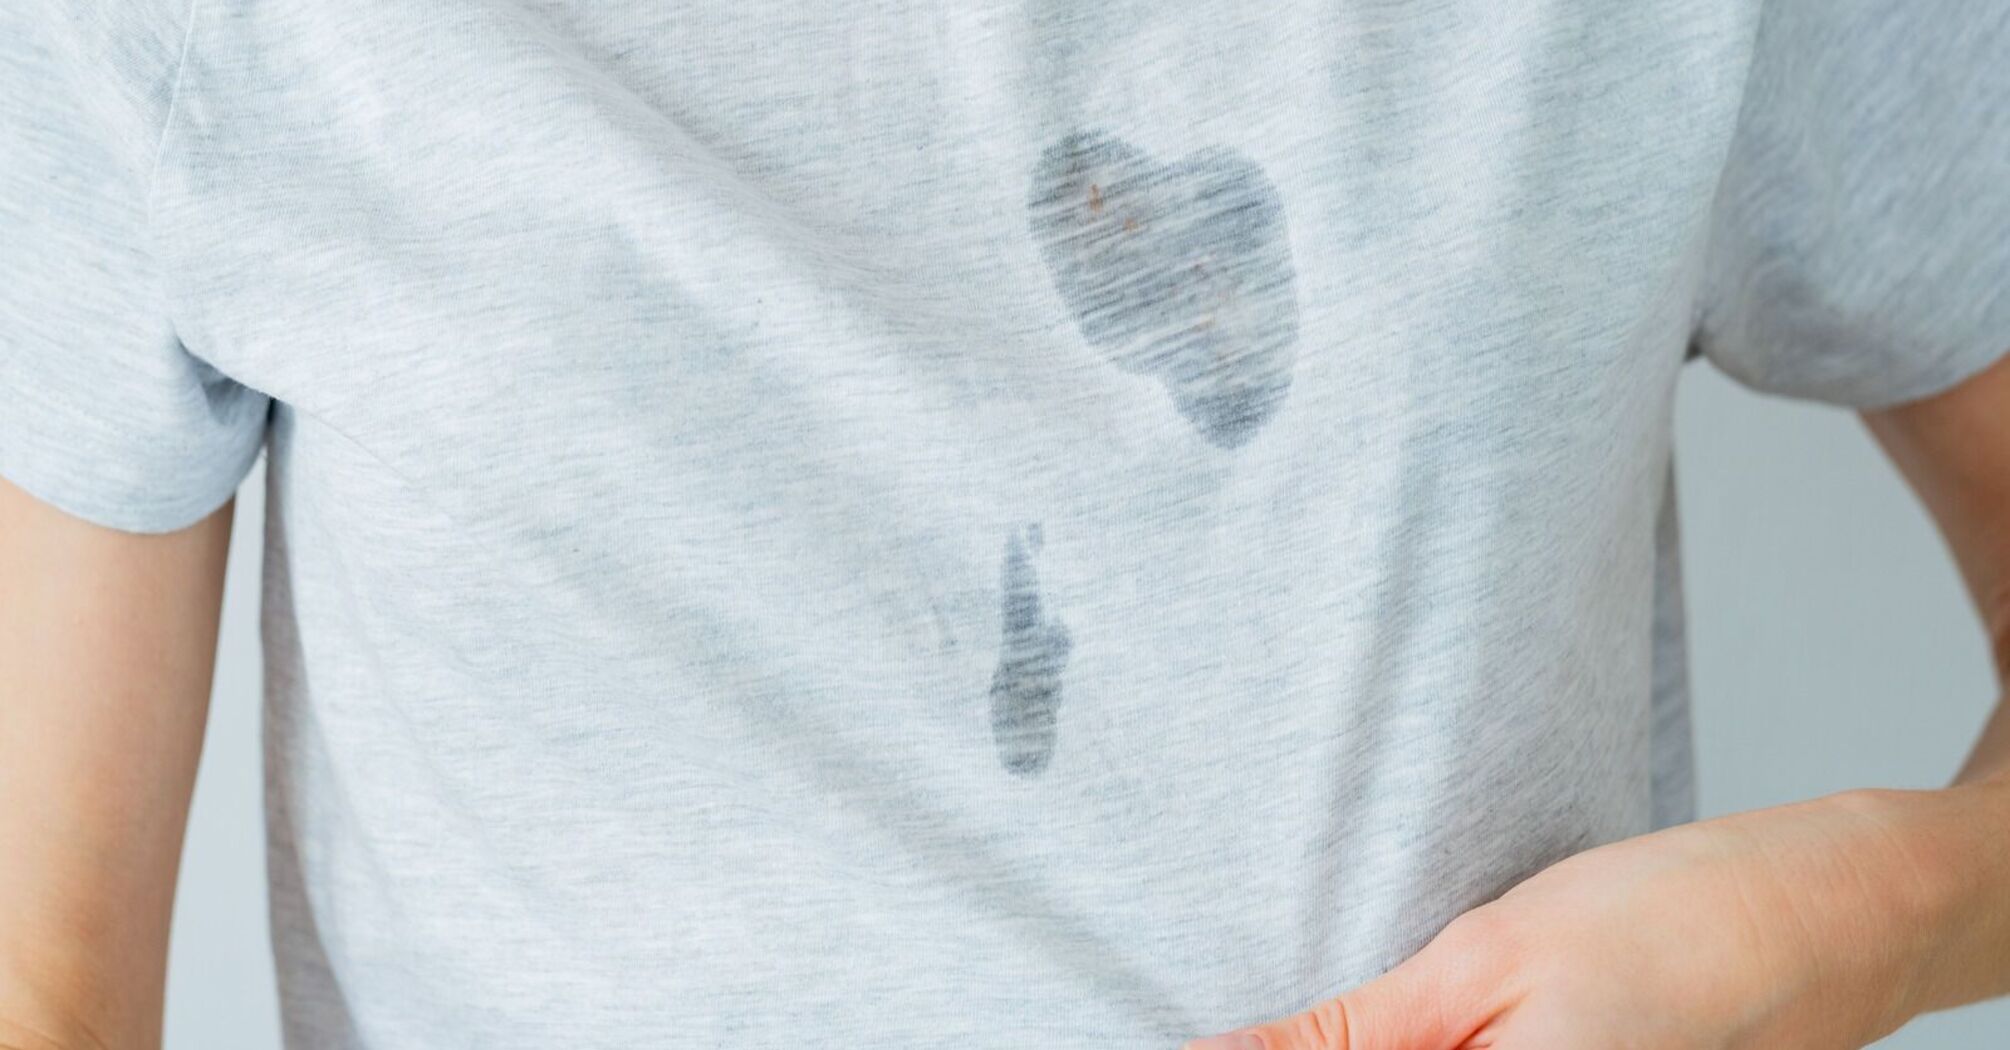 How to remove oil stains from clothes?